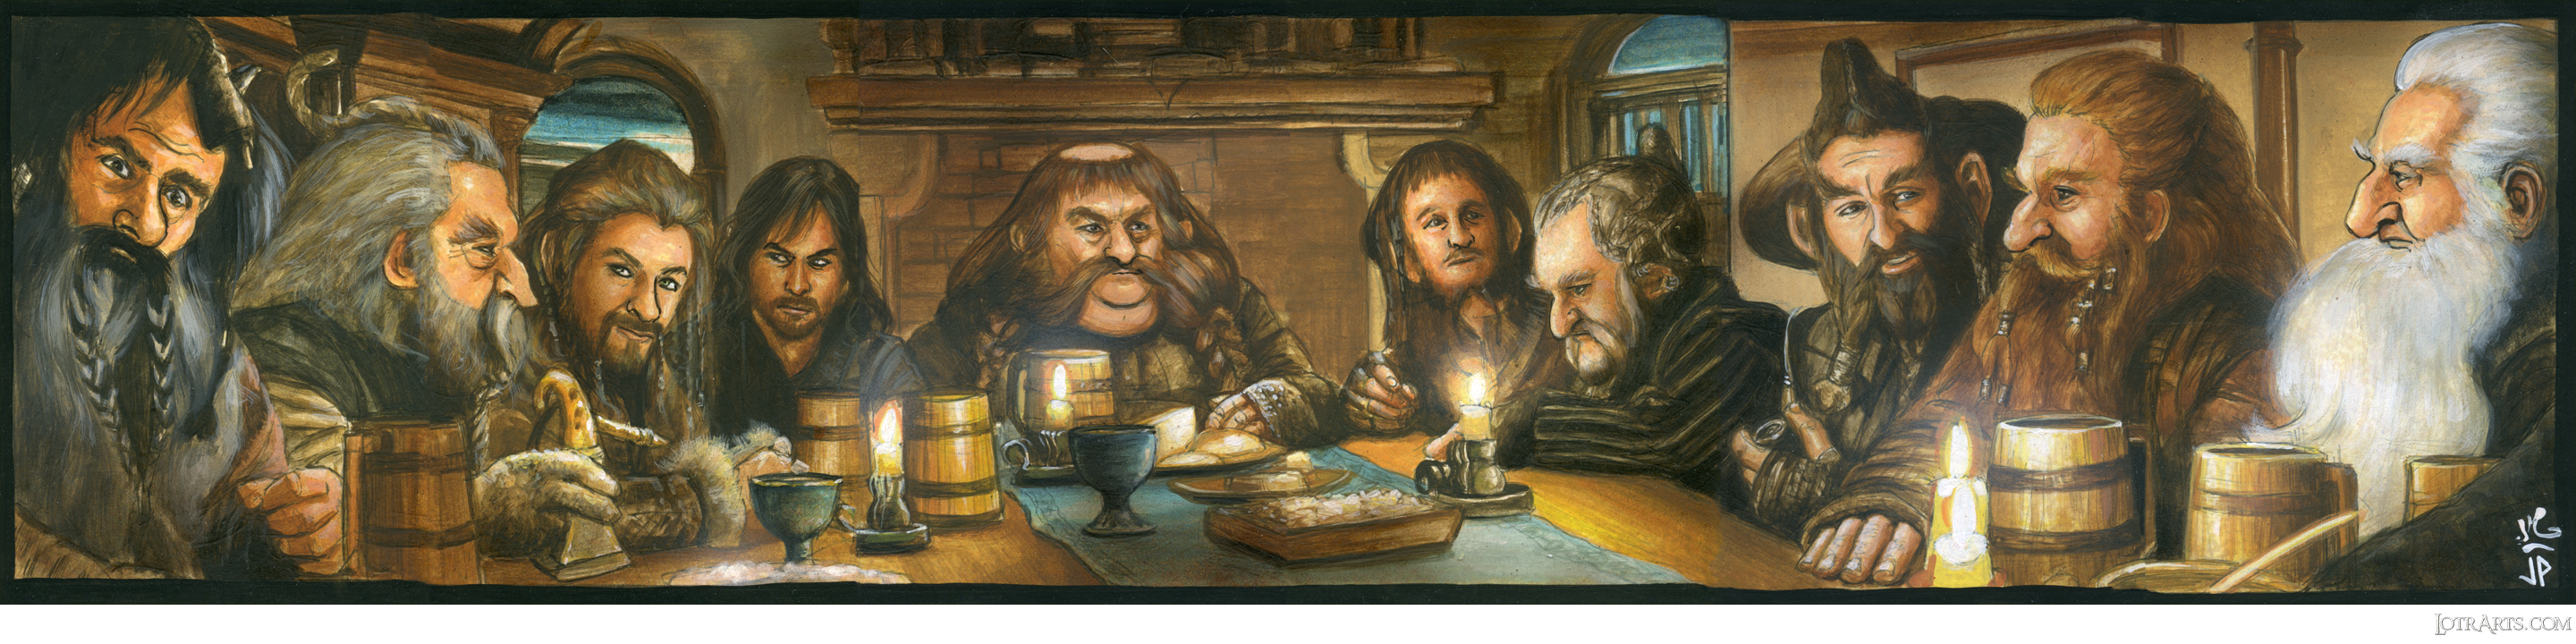 The dwarves meet at Bag End (Part1) by Potratz and Hai, five-card panel (sequenced with three-card panel)<span class="ngViews">5 views</span>